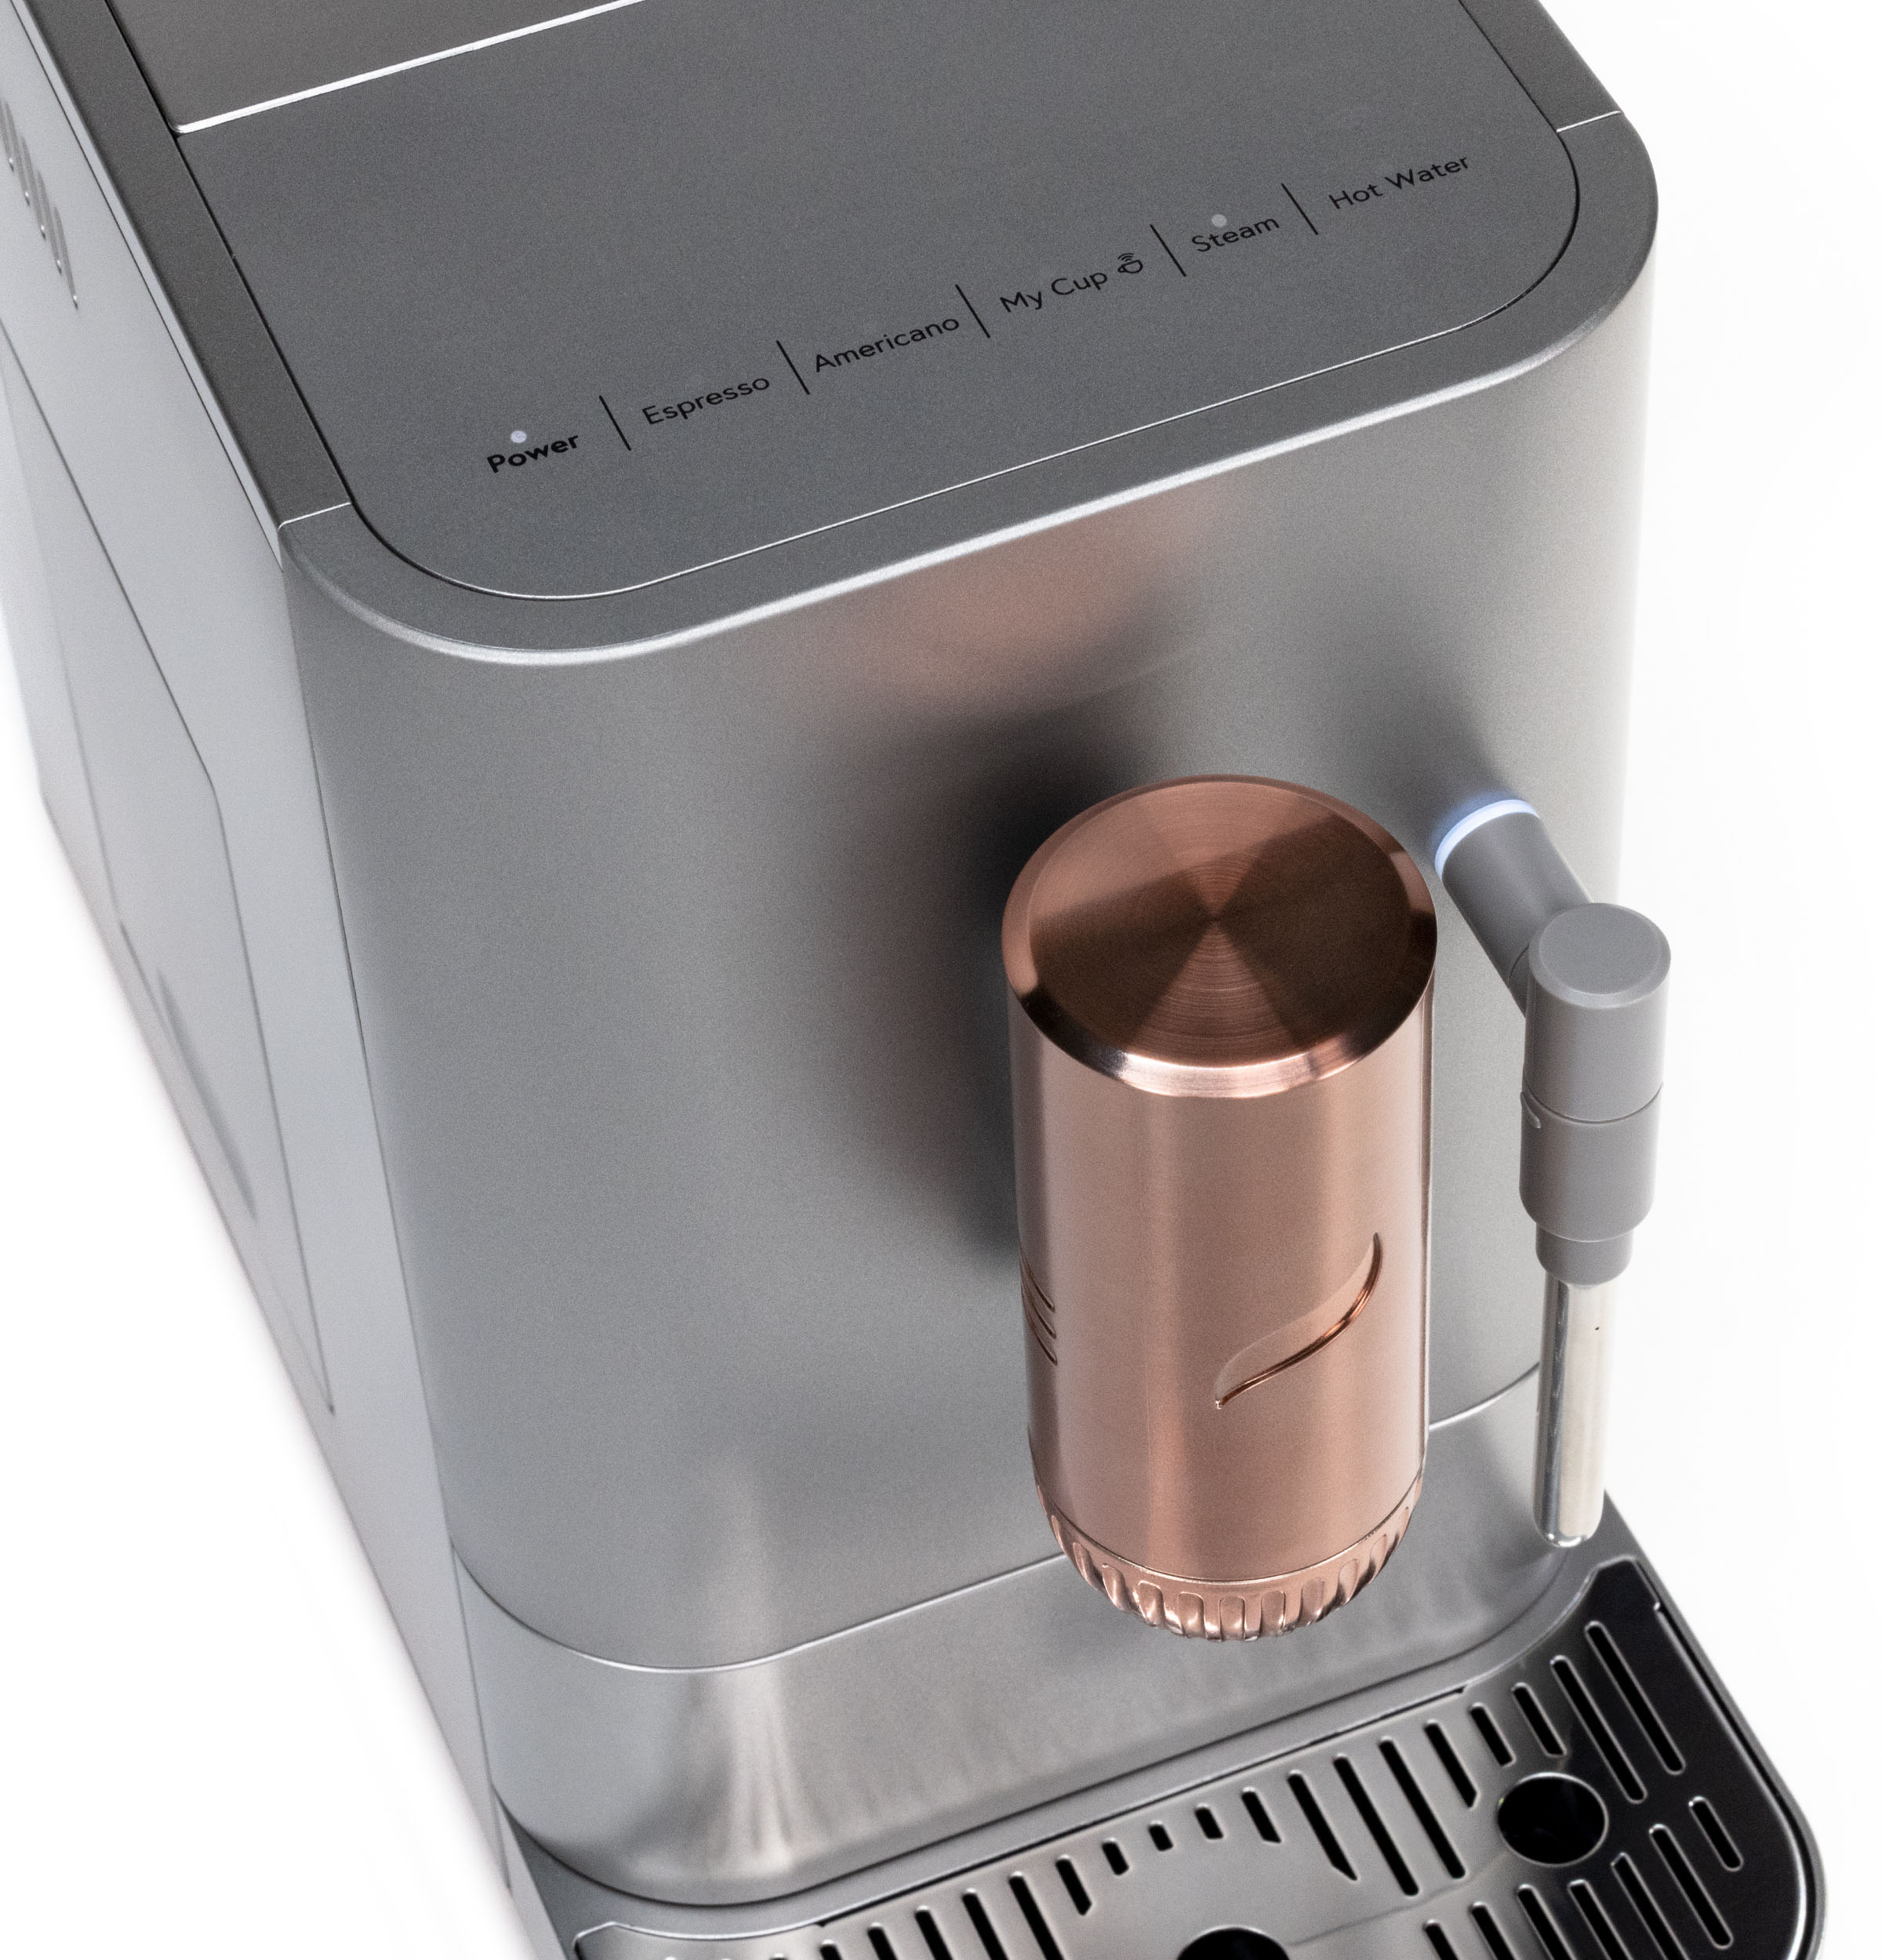 Cafe 40.5 Oz Affetto Espresso Machine + Frother in Stainless Steel